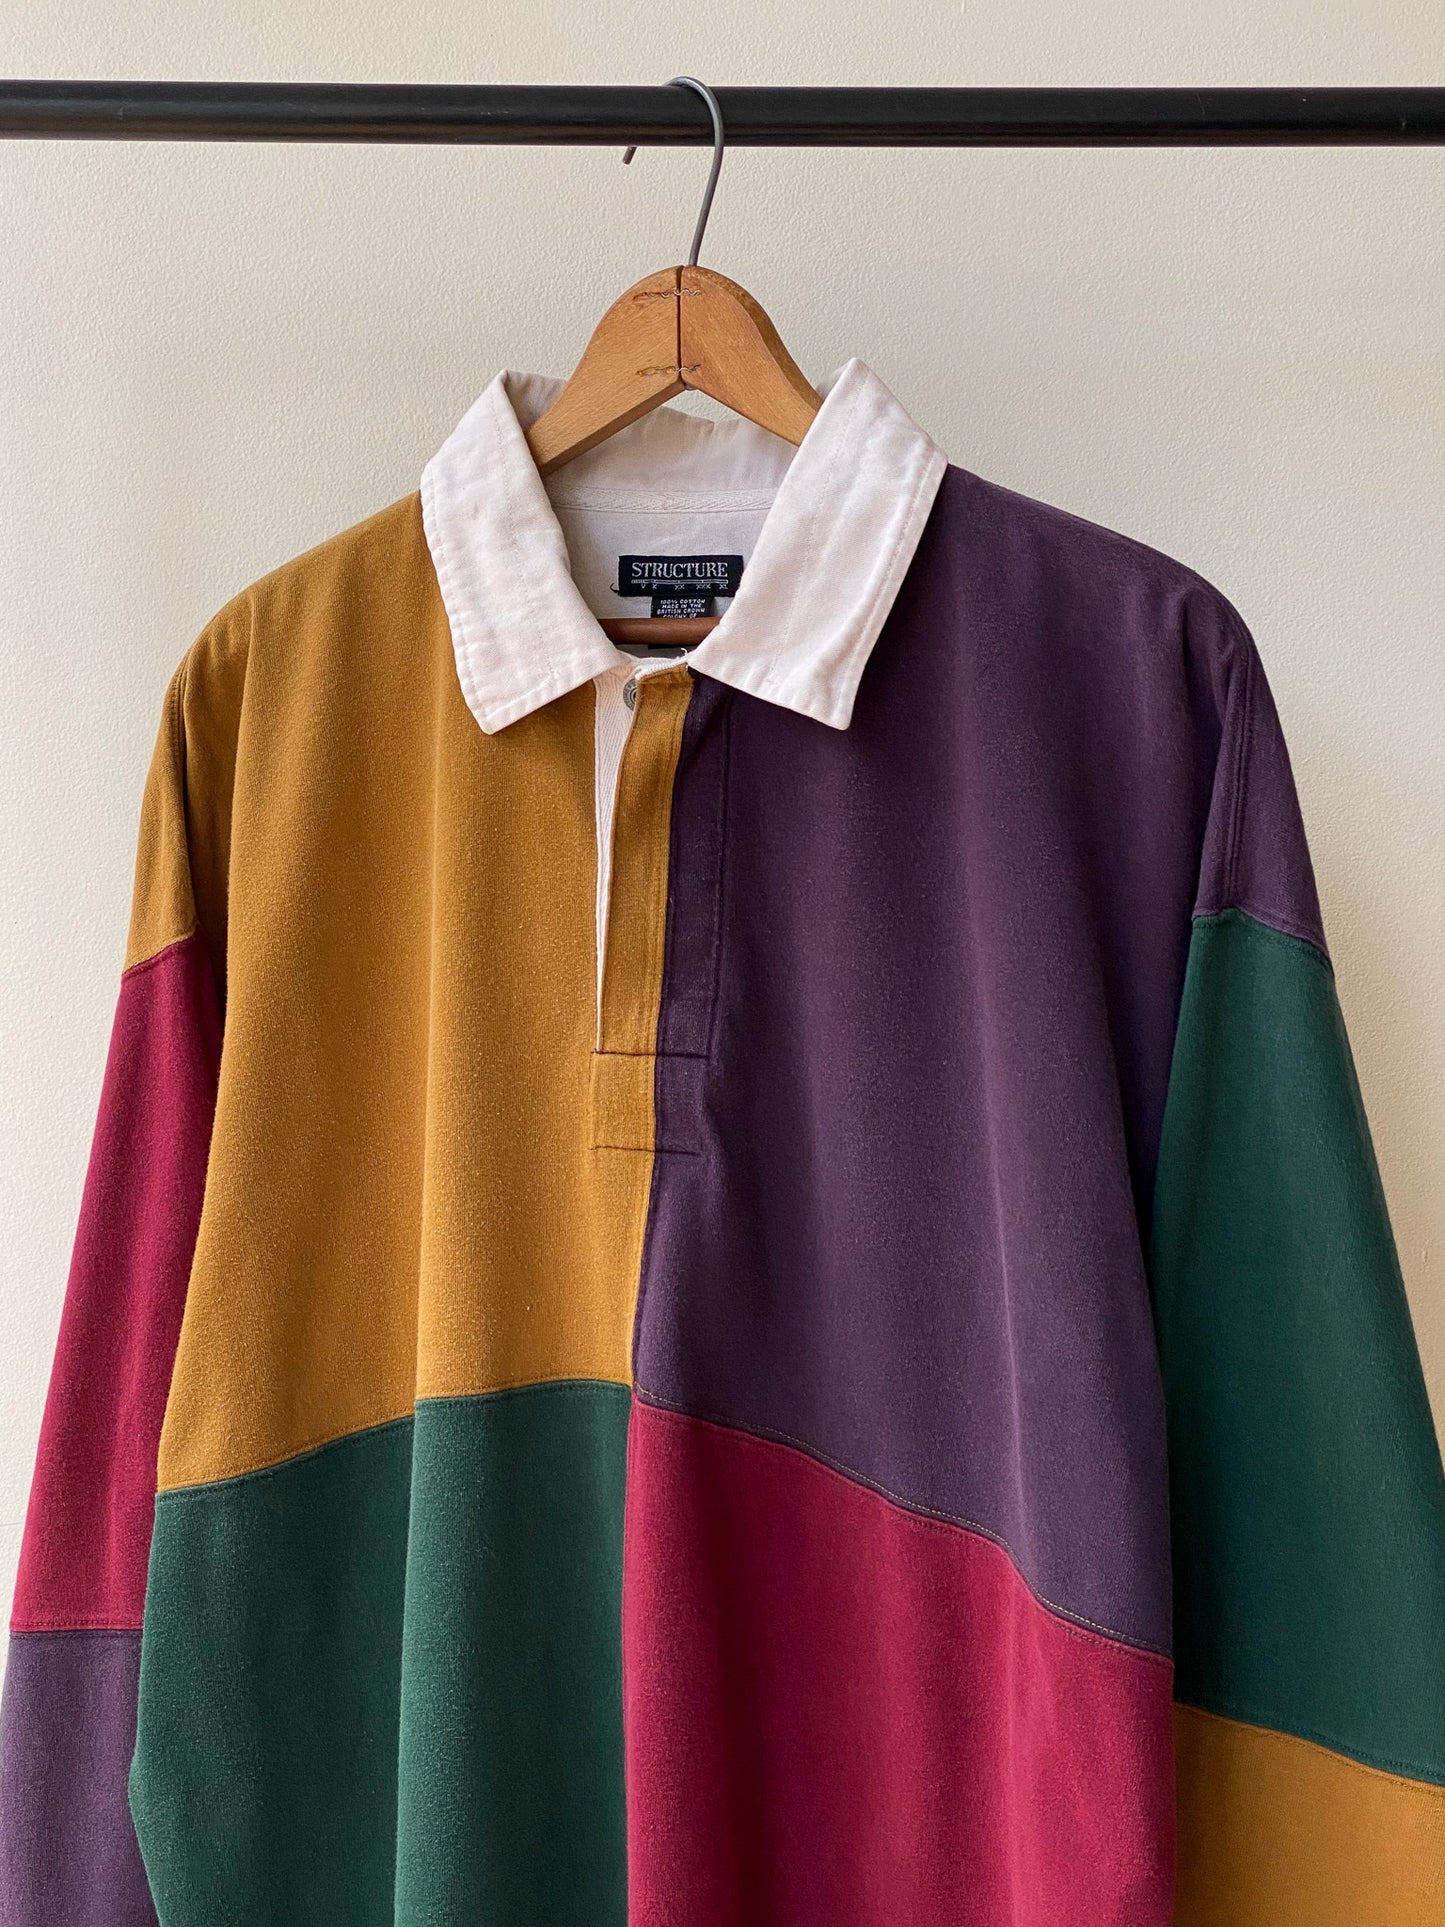 90's Structure Colorblock Rugby Shirt—[XL]